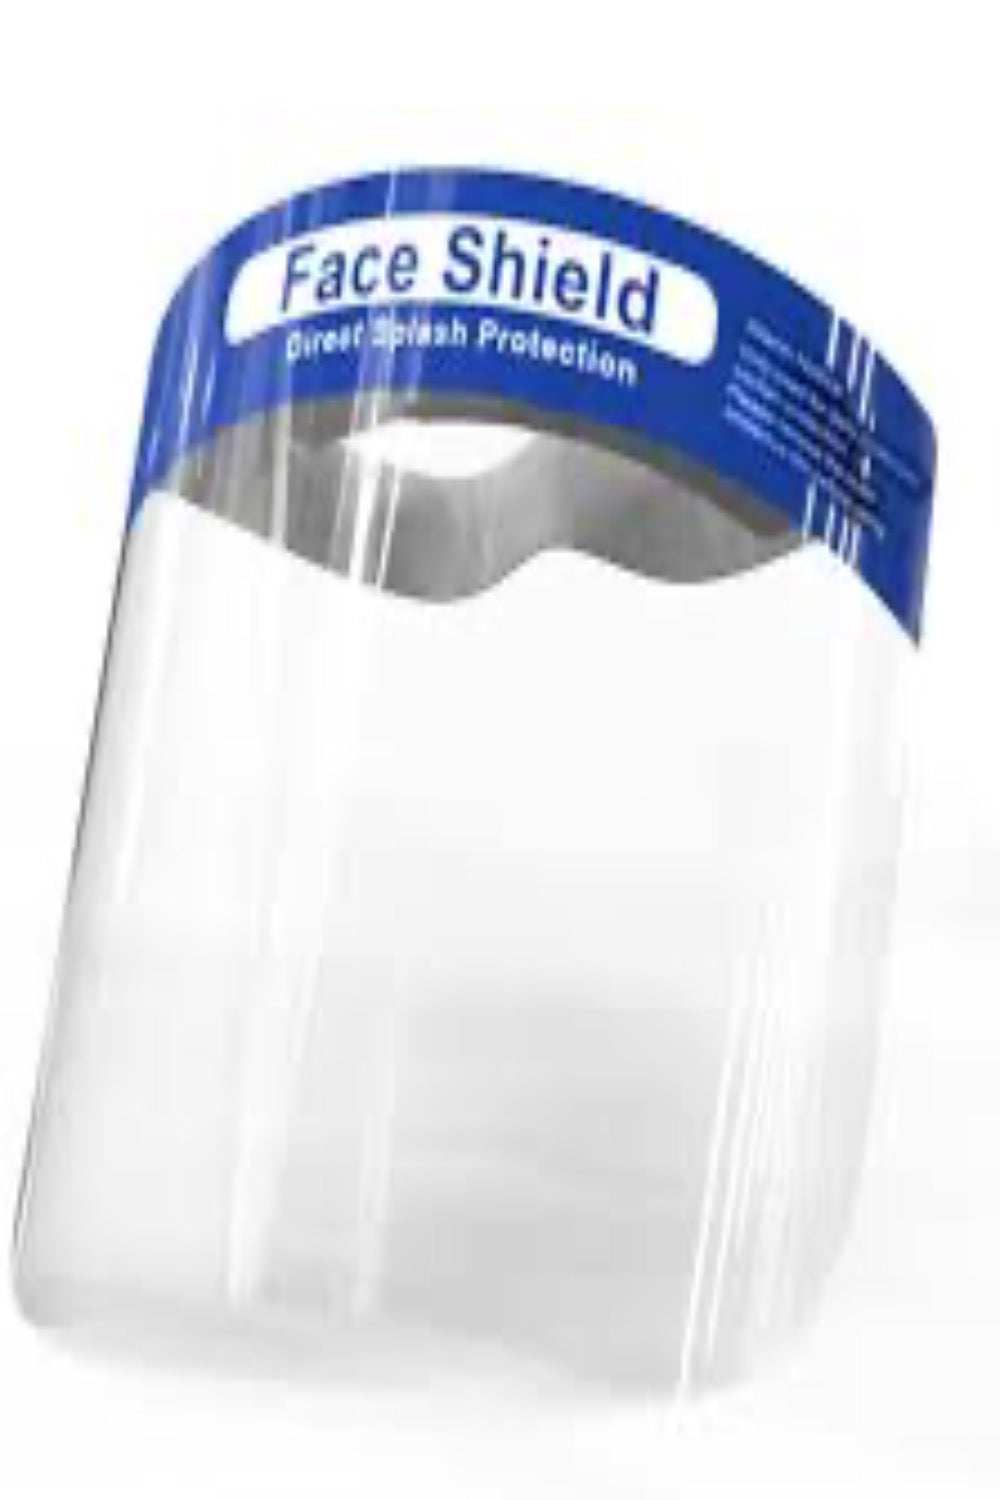 sneeze guards, productive guards, portable guards Face Shield 5/pack, with Adjustable Elastic Band for All Sizes. - PureUps